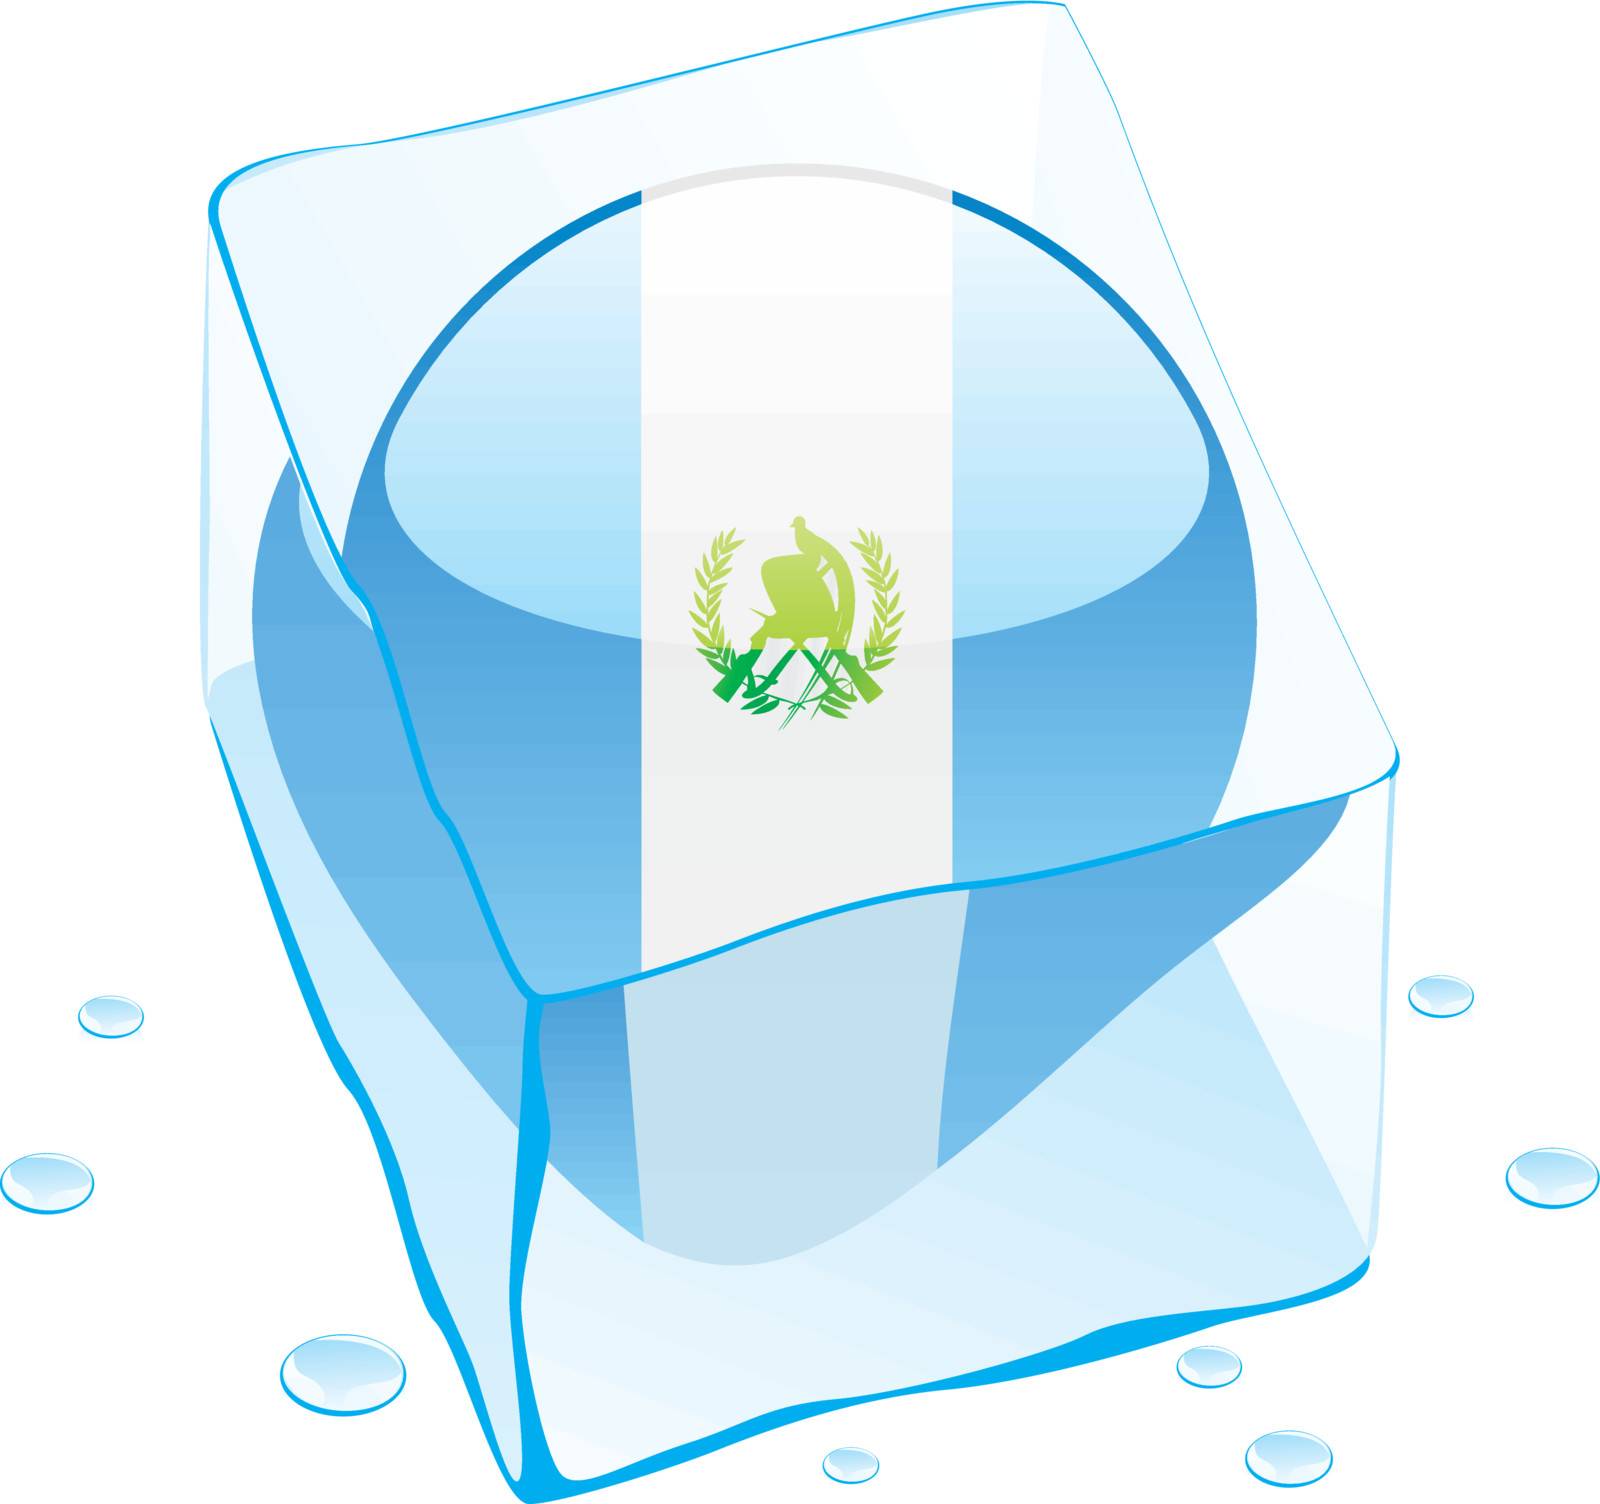 fully editable vector illustration of guatemala button flag frozen in ice cube